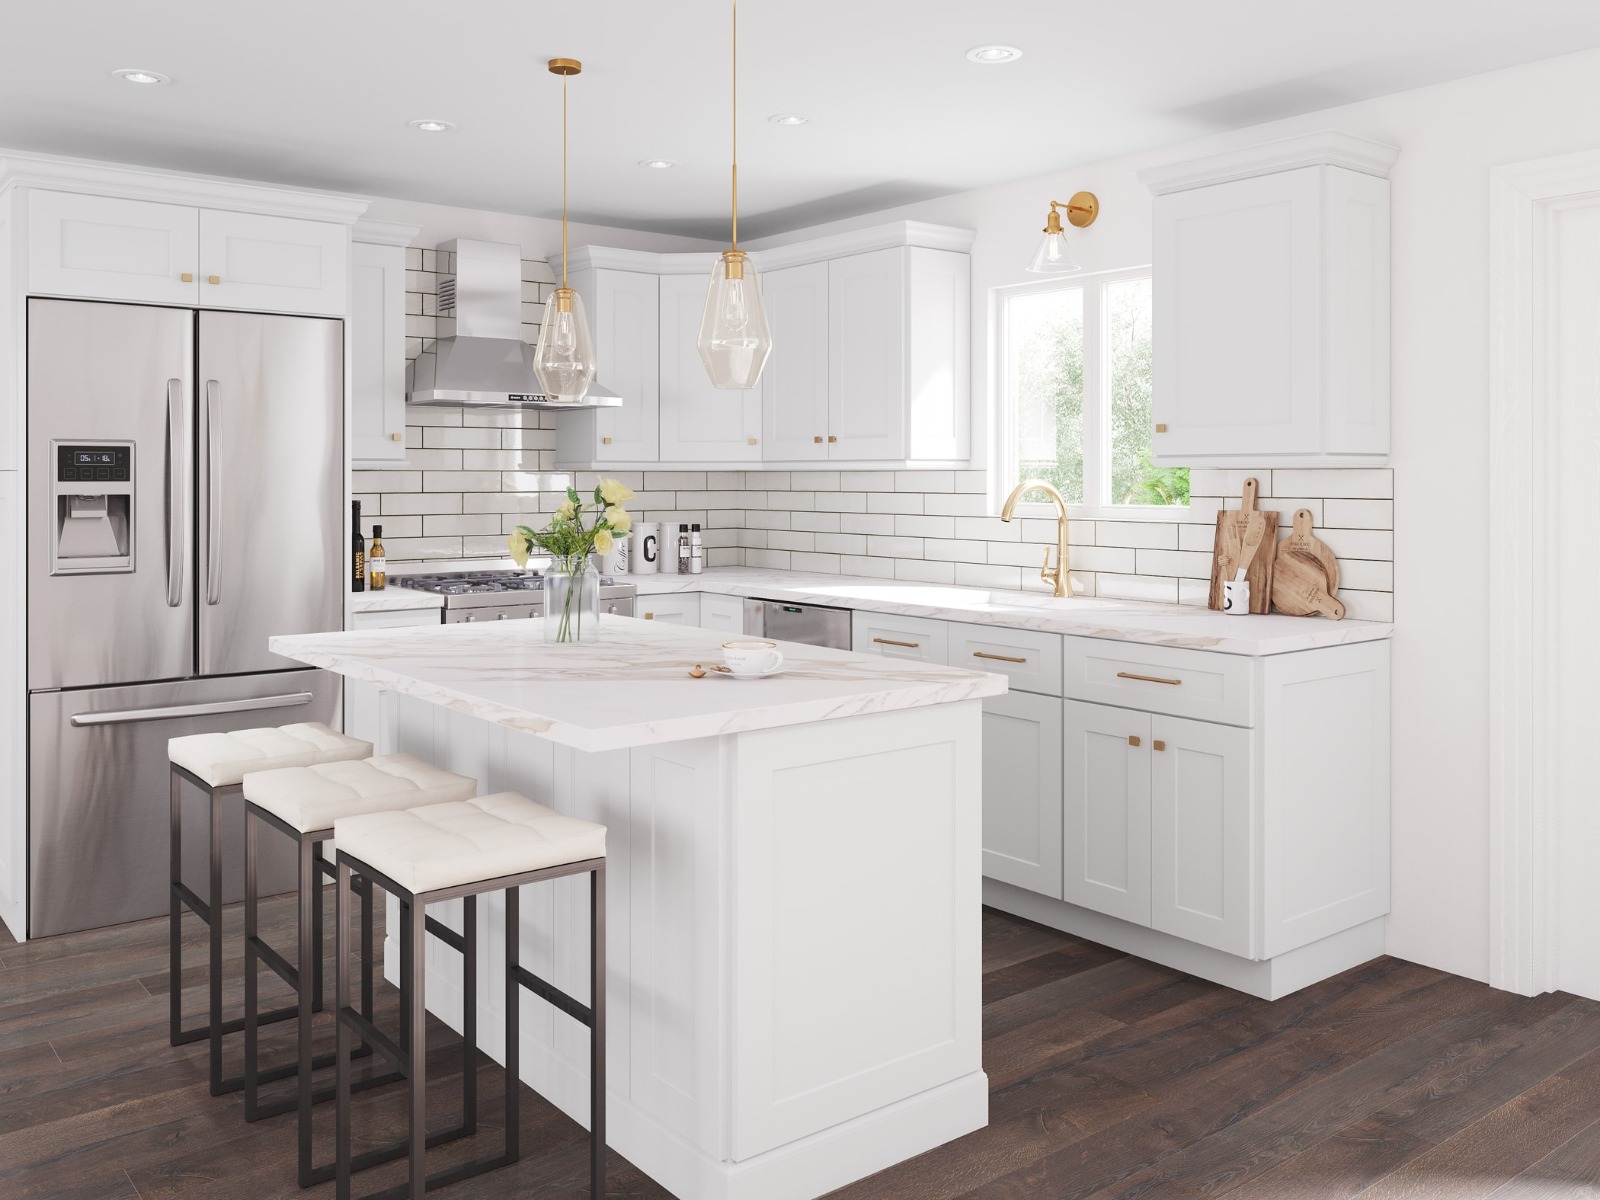 Shaker-style white cabinets